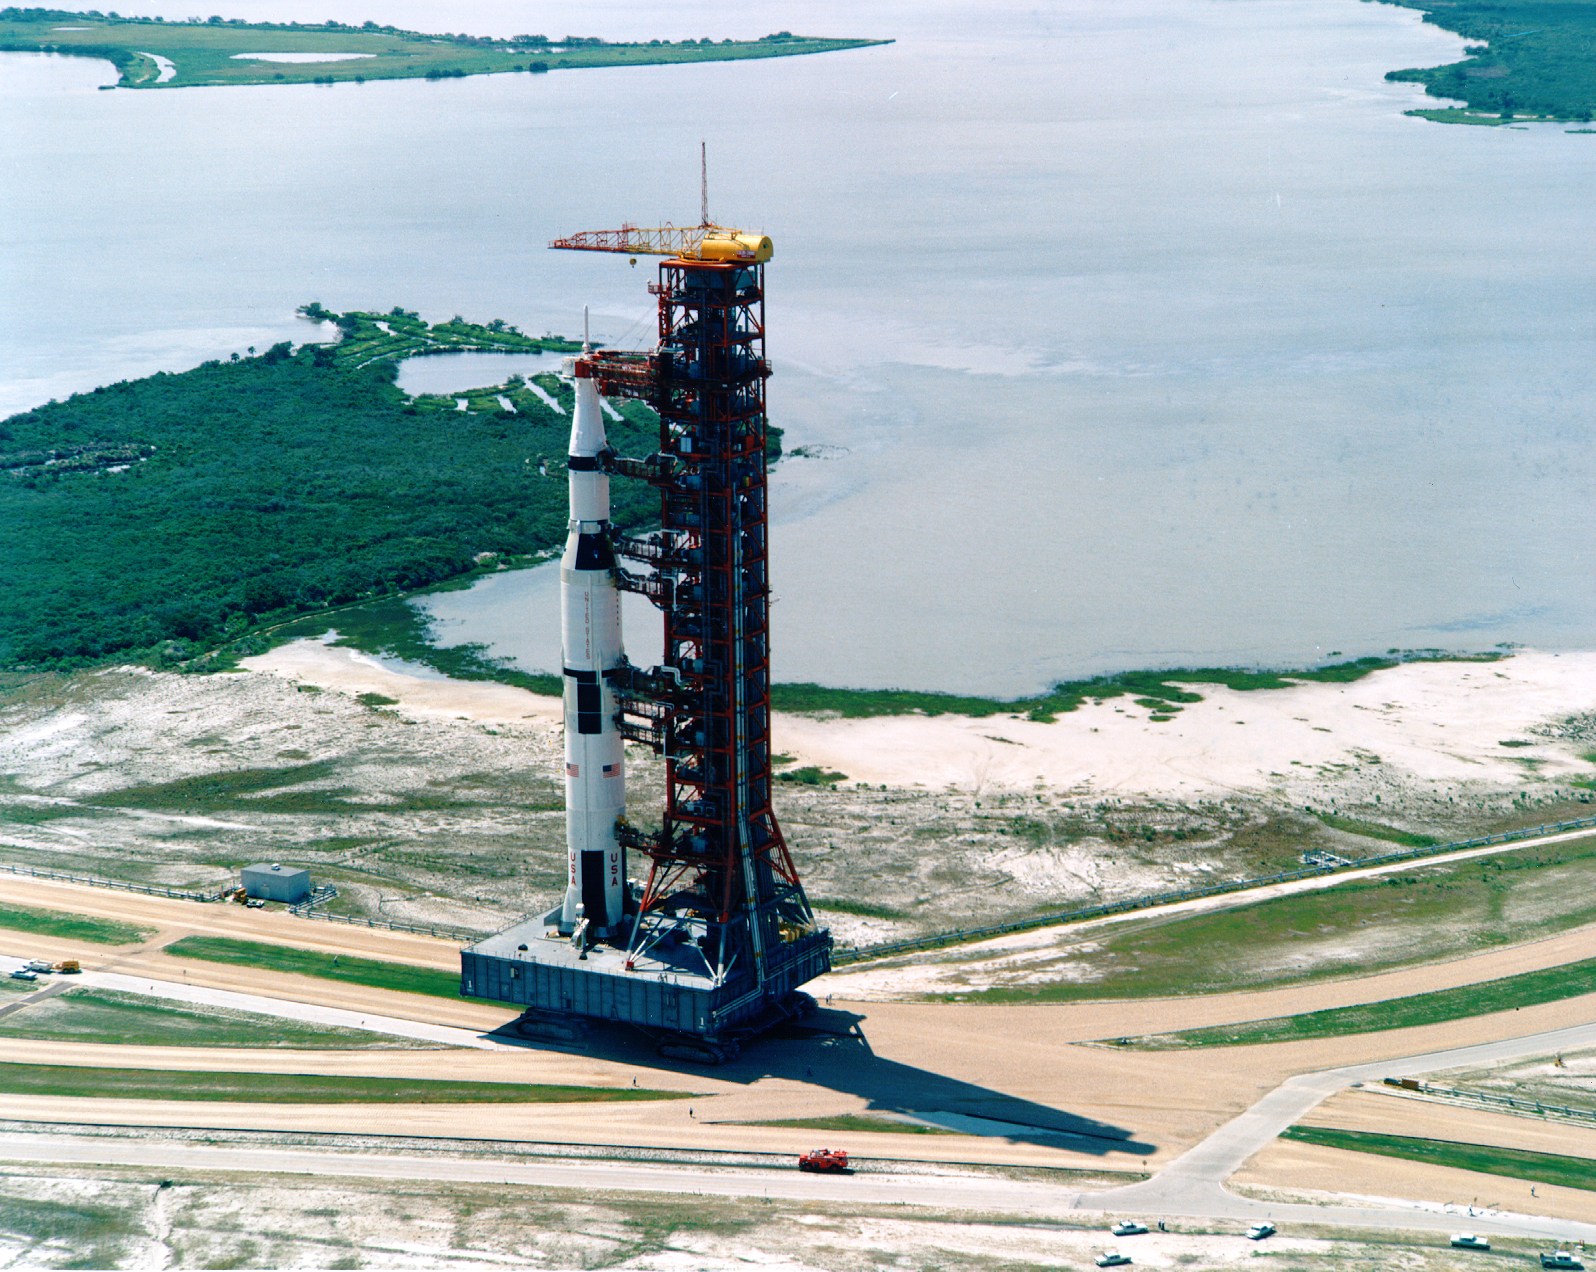 The Saturn V launch vehicle is transported a launch pad at the Canaveral Cape space center on May 20, 1969.